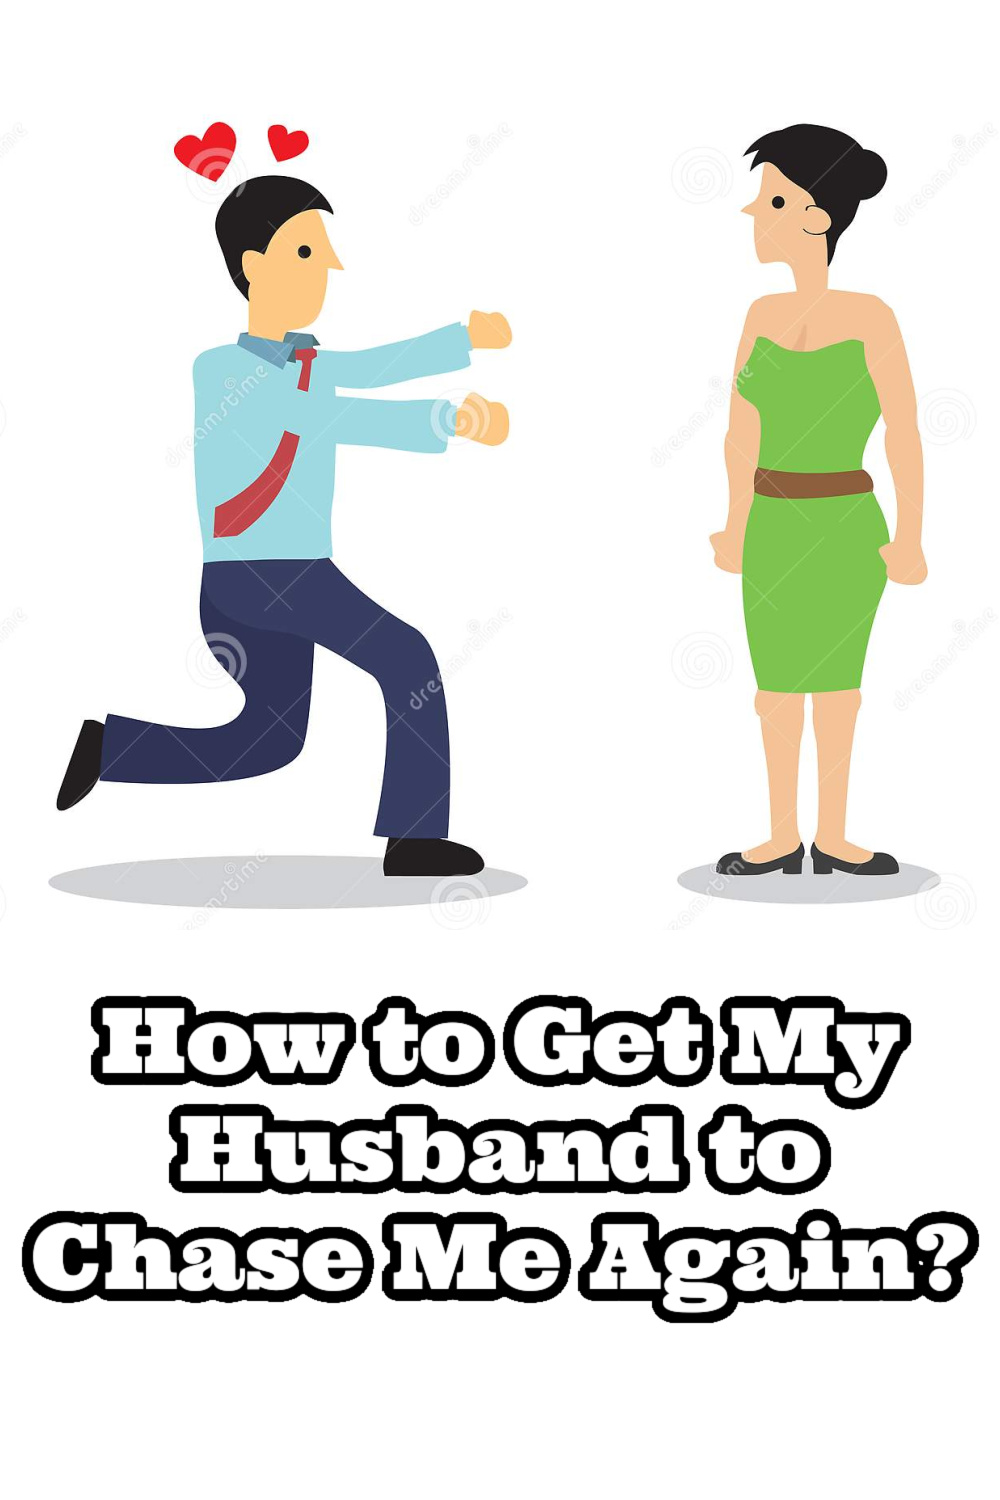 how to get my husband to chase me again, how to get your husband to chase you again, chasing vs pursuing a woman, feminine radiance is irresistible, feminine energy in relationships, magnetic feminine energy, healing your feminine energy, how to connect to your feminine energy, femininity is beautiful, my femininity journey, feminine radiance, feminine energy course, femininity in relationships, understanding masculine and feminine energy, understanding masculine and feminine energy beginners guide, Everyday starlet, sarah blodgett,